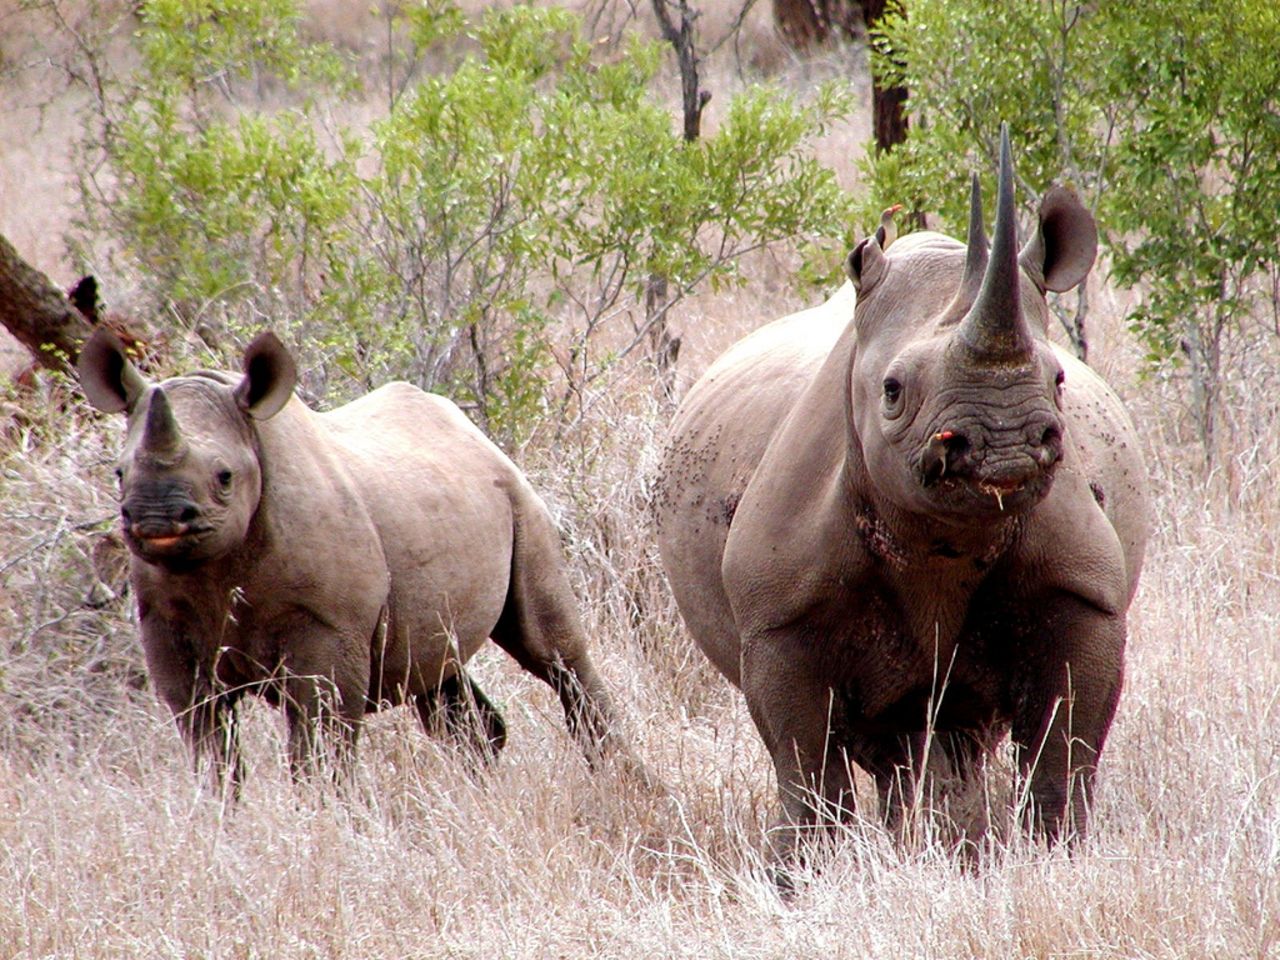 Botswana offers one of the best chances to see rhinoceros, the most endangered of the legendary Big Five African game species.